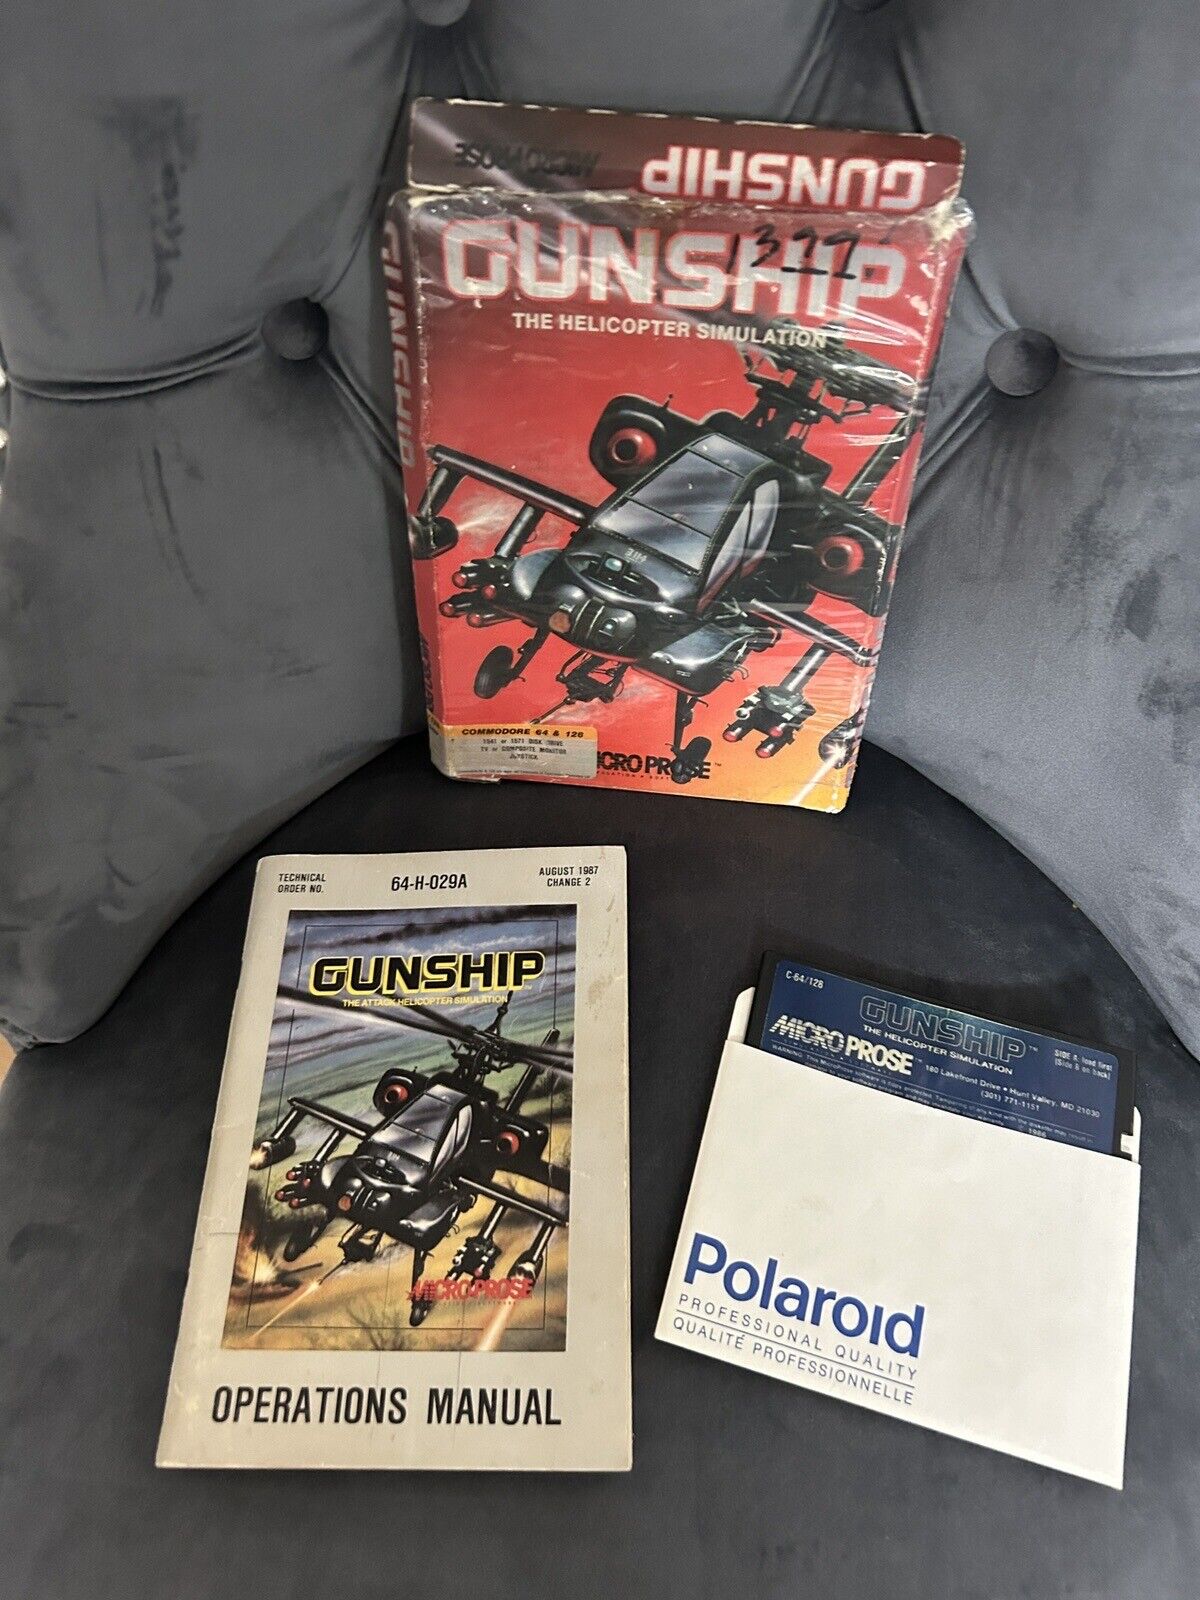 BOXED Gunship Helicopter Simulation by MicroProse Commodore 64 / 128 (1986)